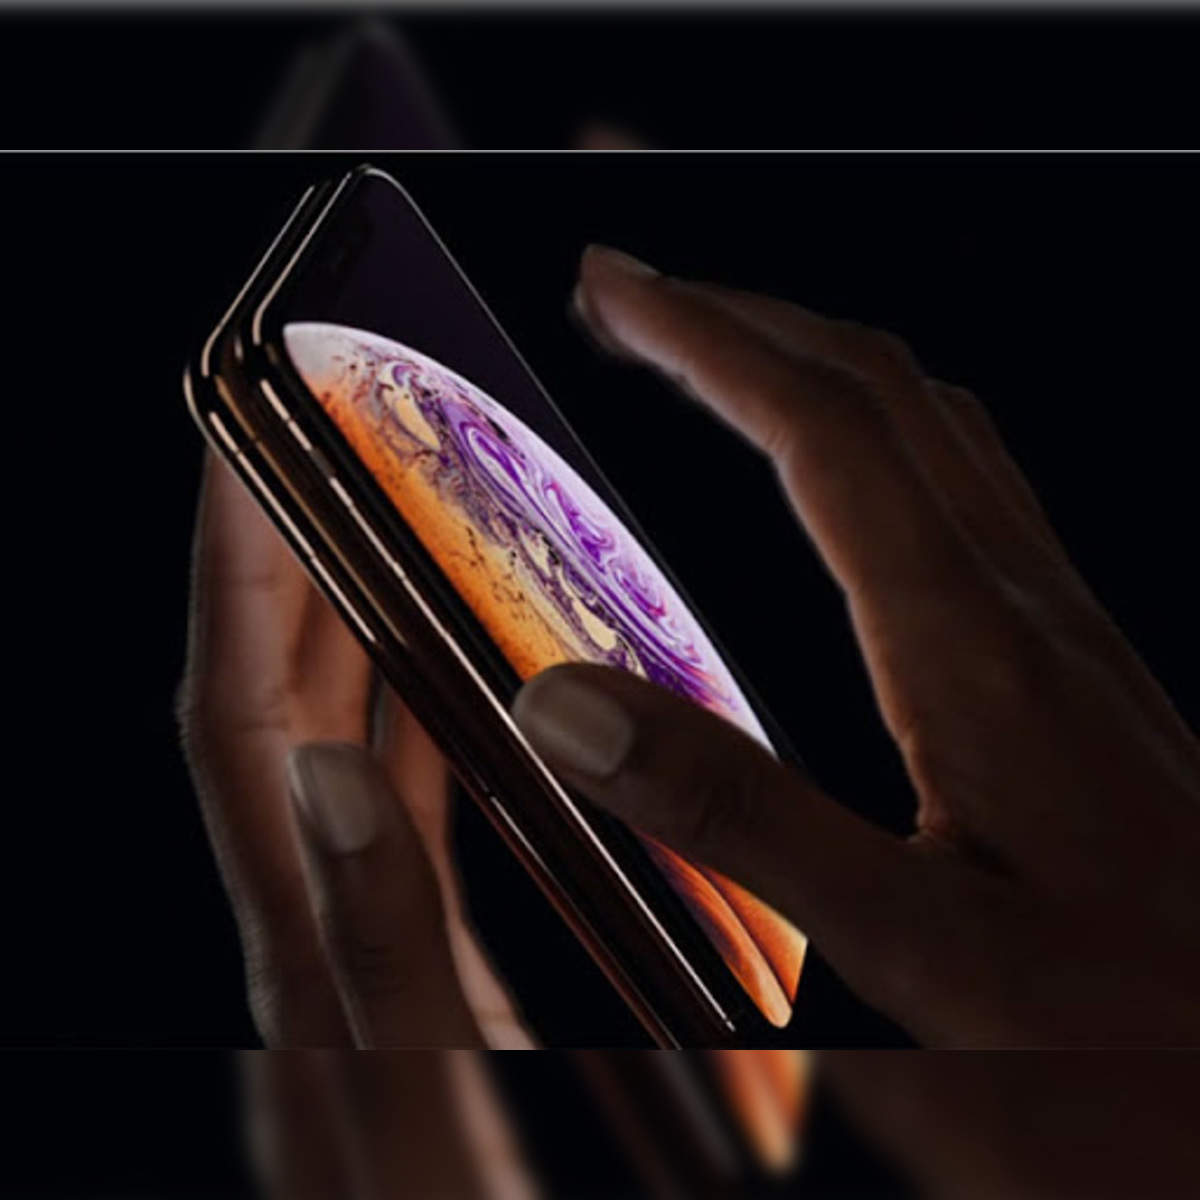 Apple iPhone Xs, Xs Max, Xr Photos: Dual-SIM iPhones with Super Retina HD  display are magnificent - Technology Gallery News